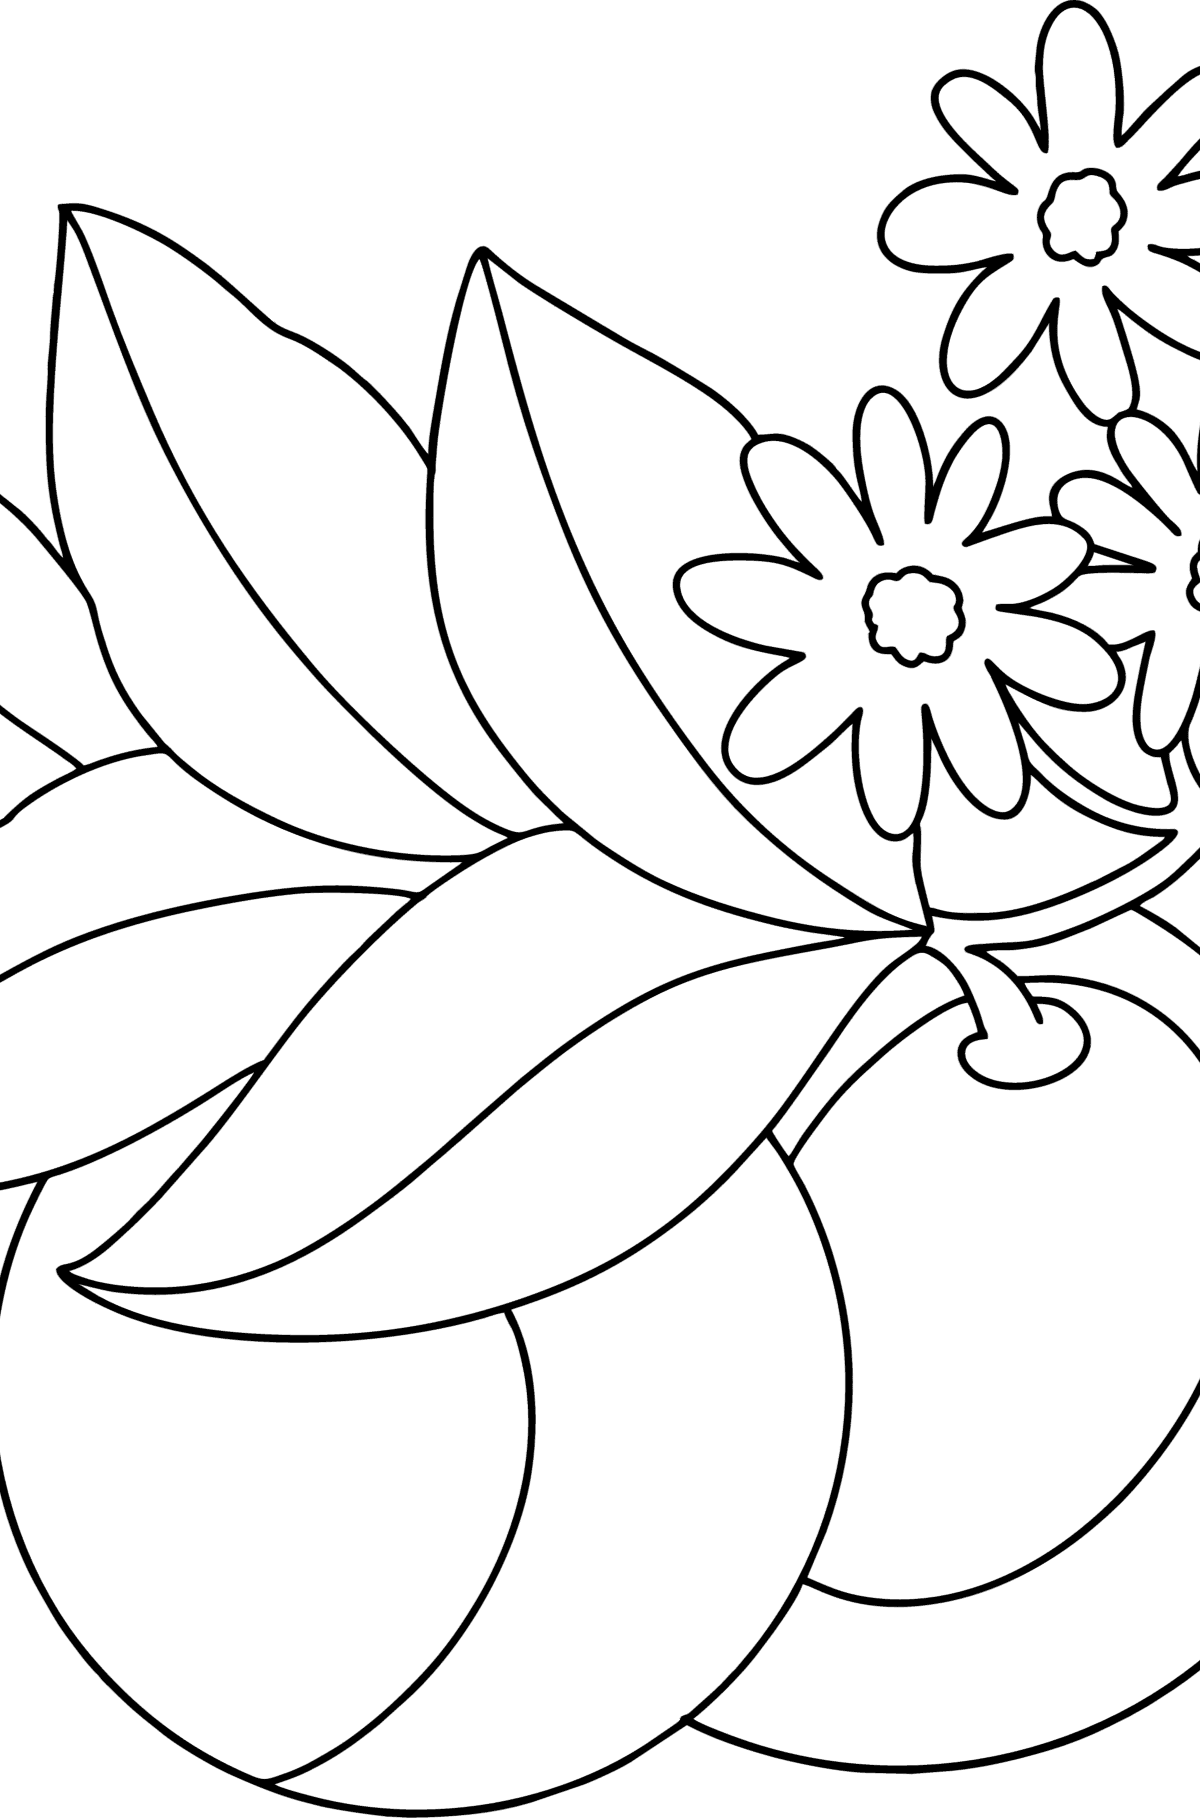 Orange on a branch сoloring page - Coloring Pages for Kids